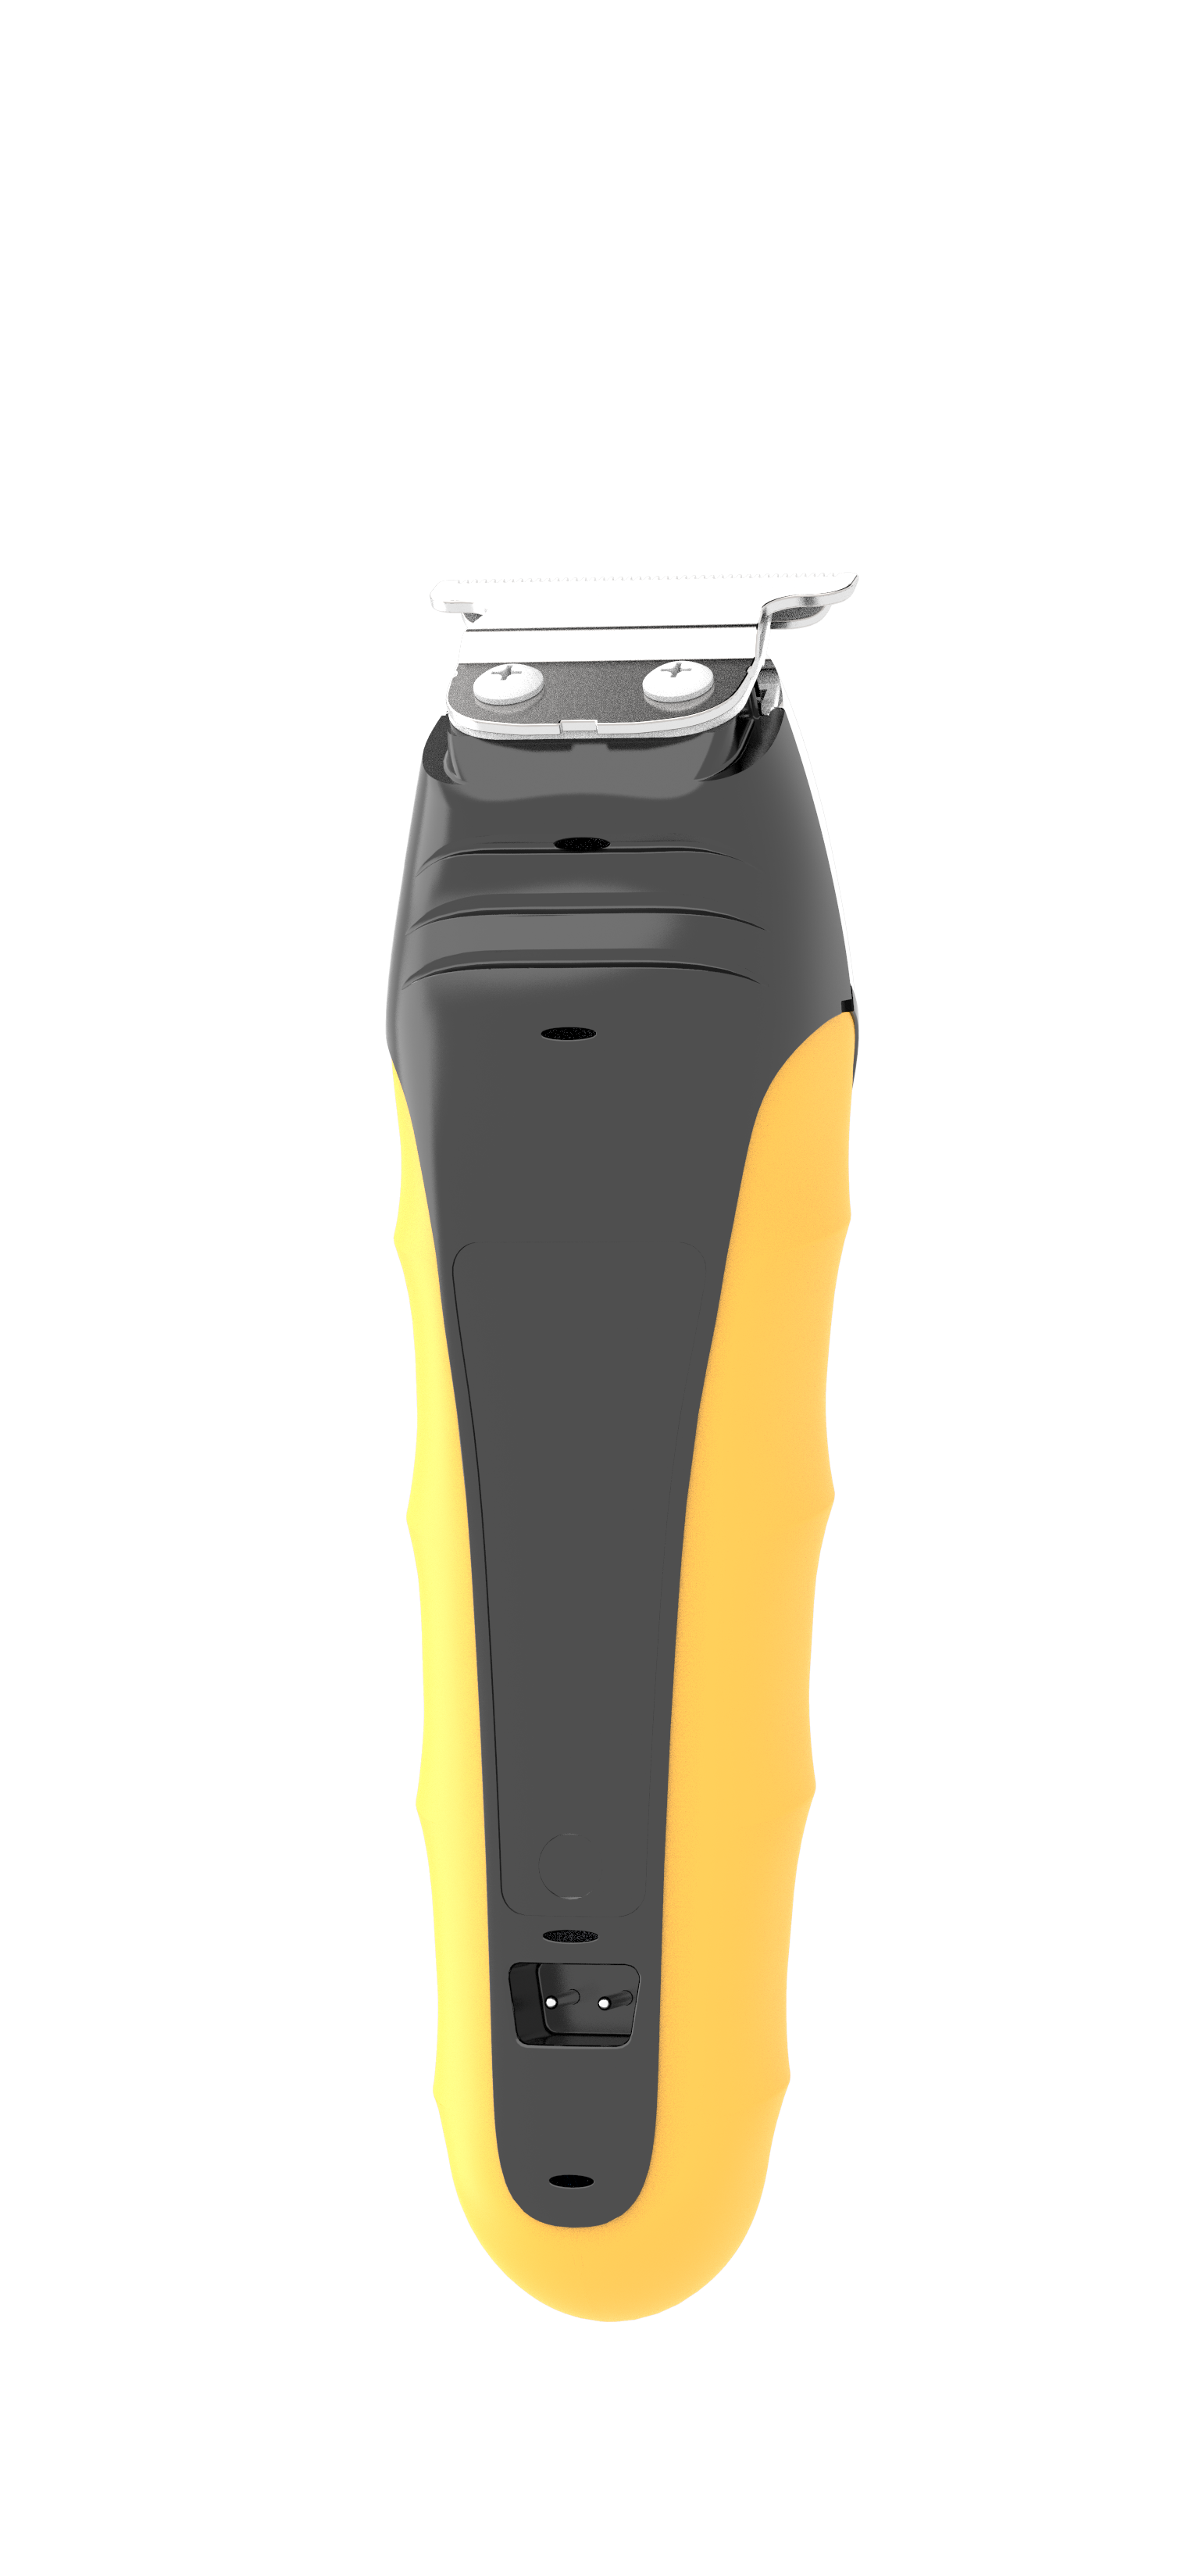 Black/Yellow, Ion Lithium Trimmer Men, Wet/Dry for Rechargeable 9899 LifeProof Wahl